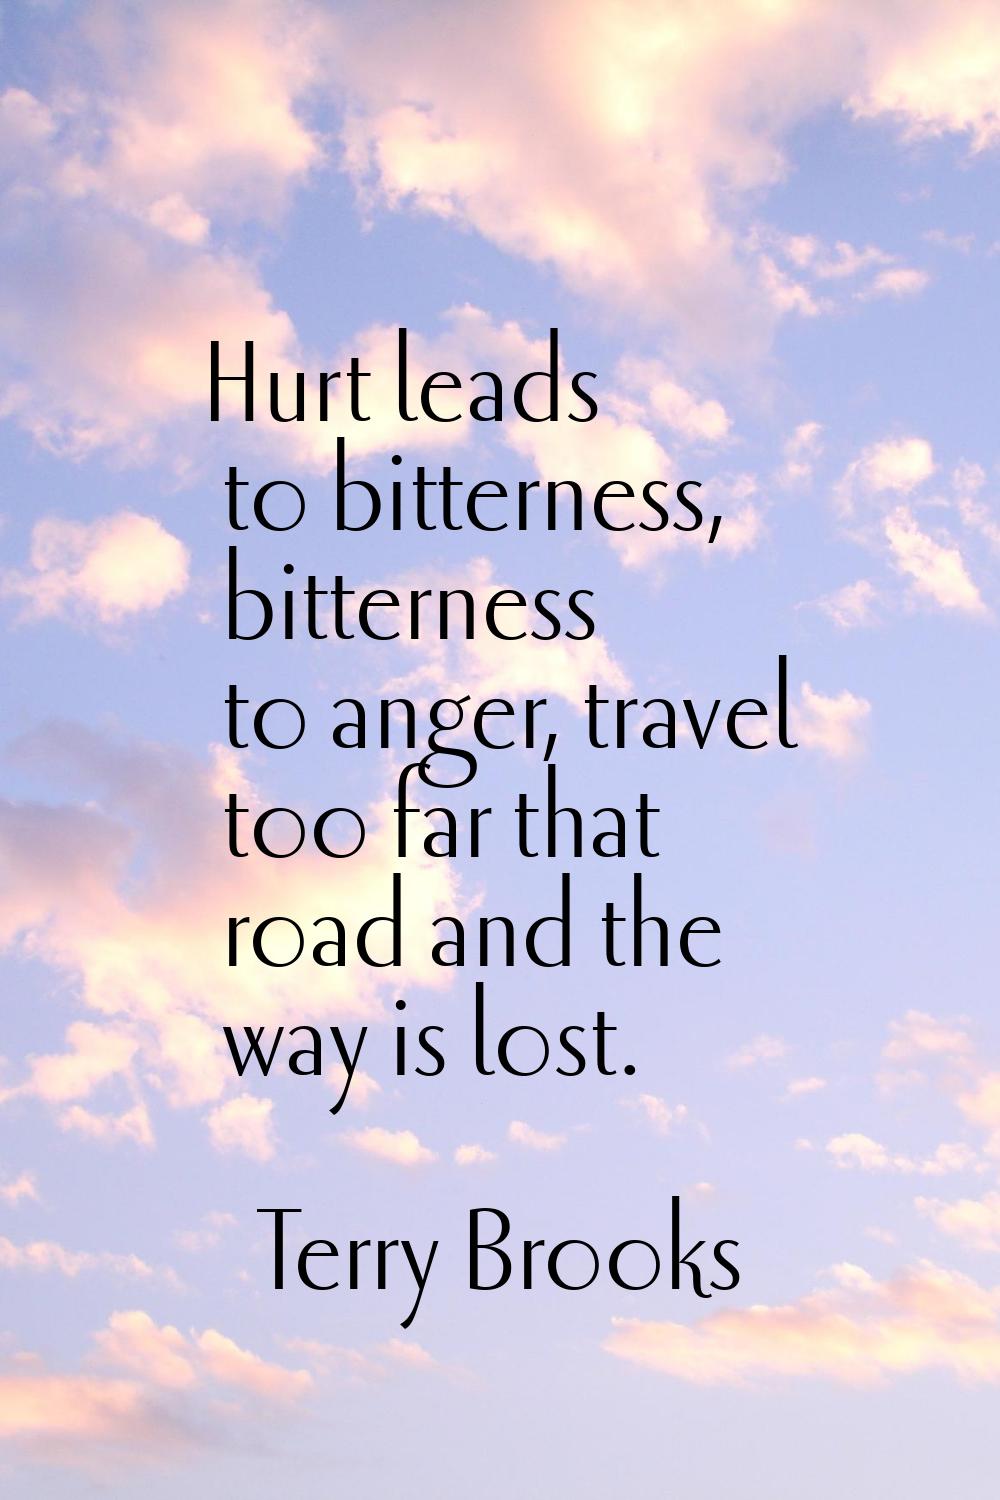 Hurt leads to bitterness, bitterness to anger, travel too far that road and the way is lost.